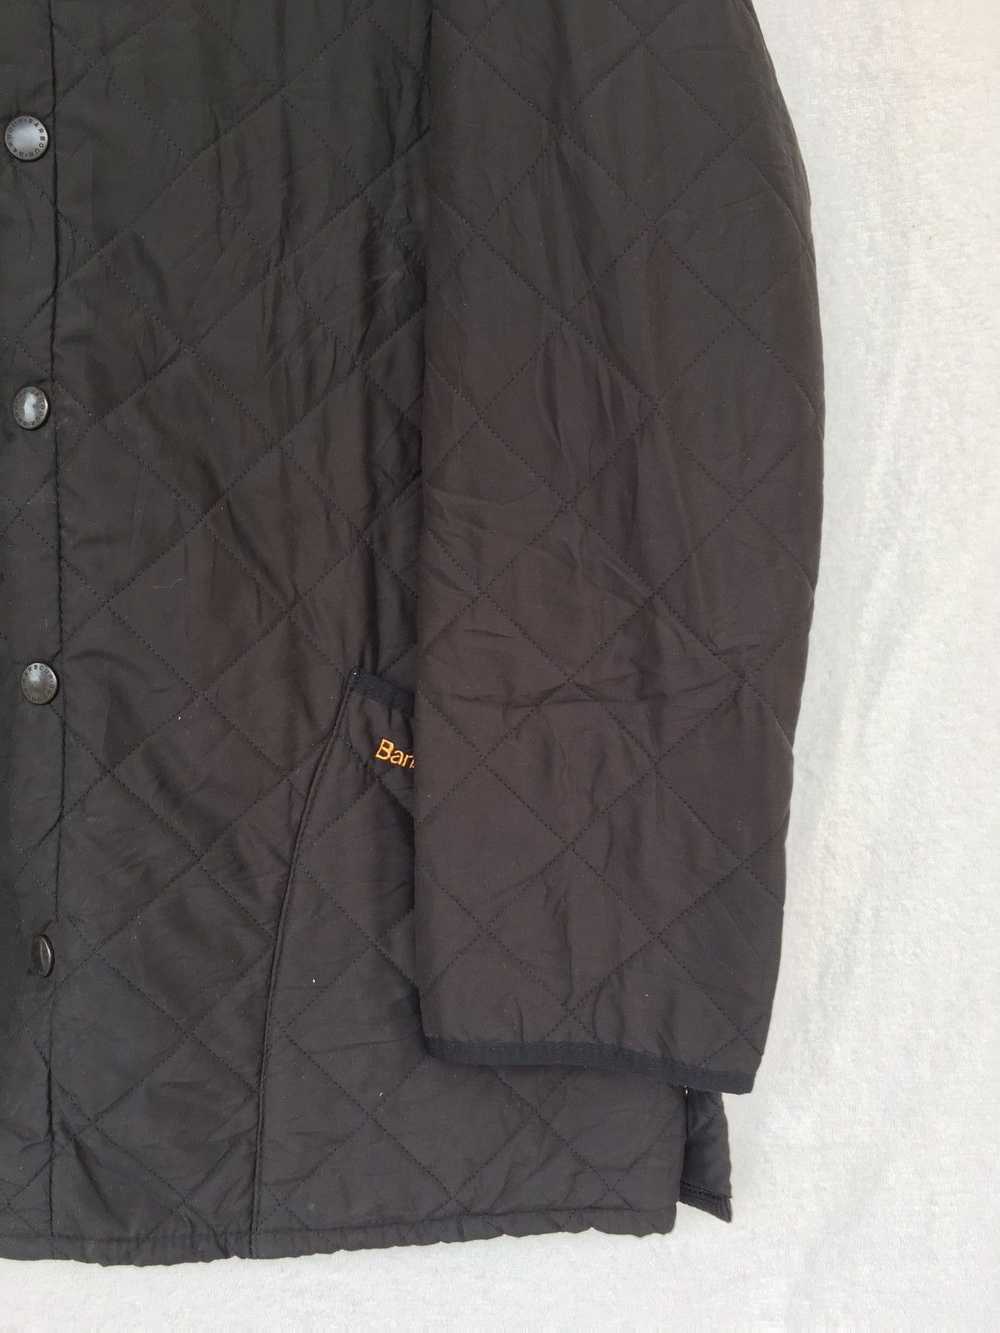 Barbour quilted jacket - image 4